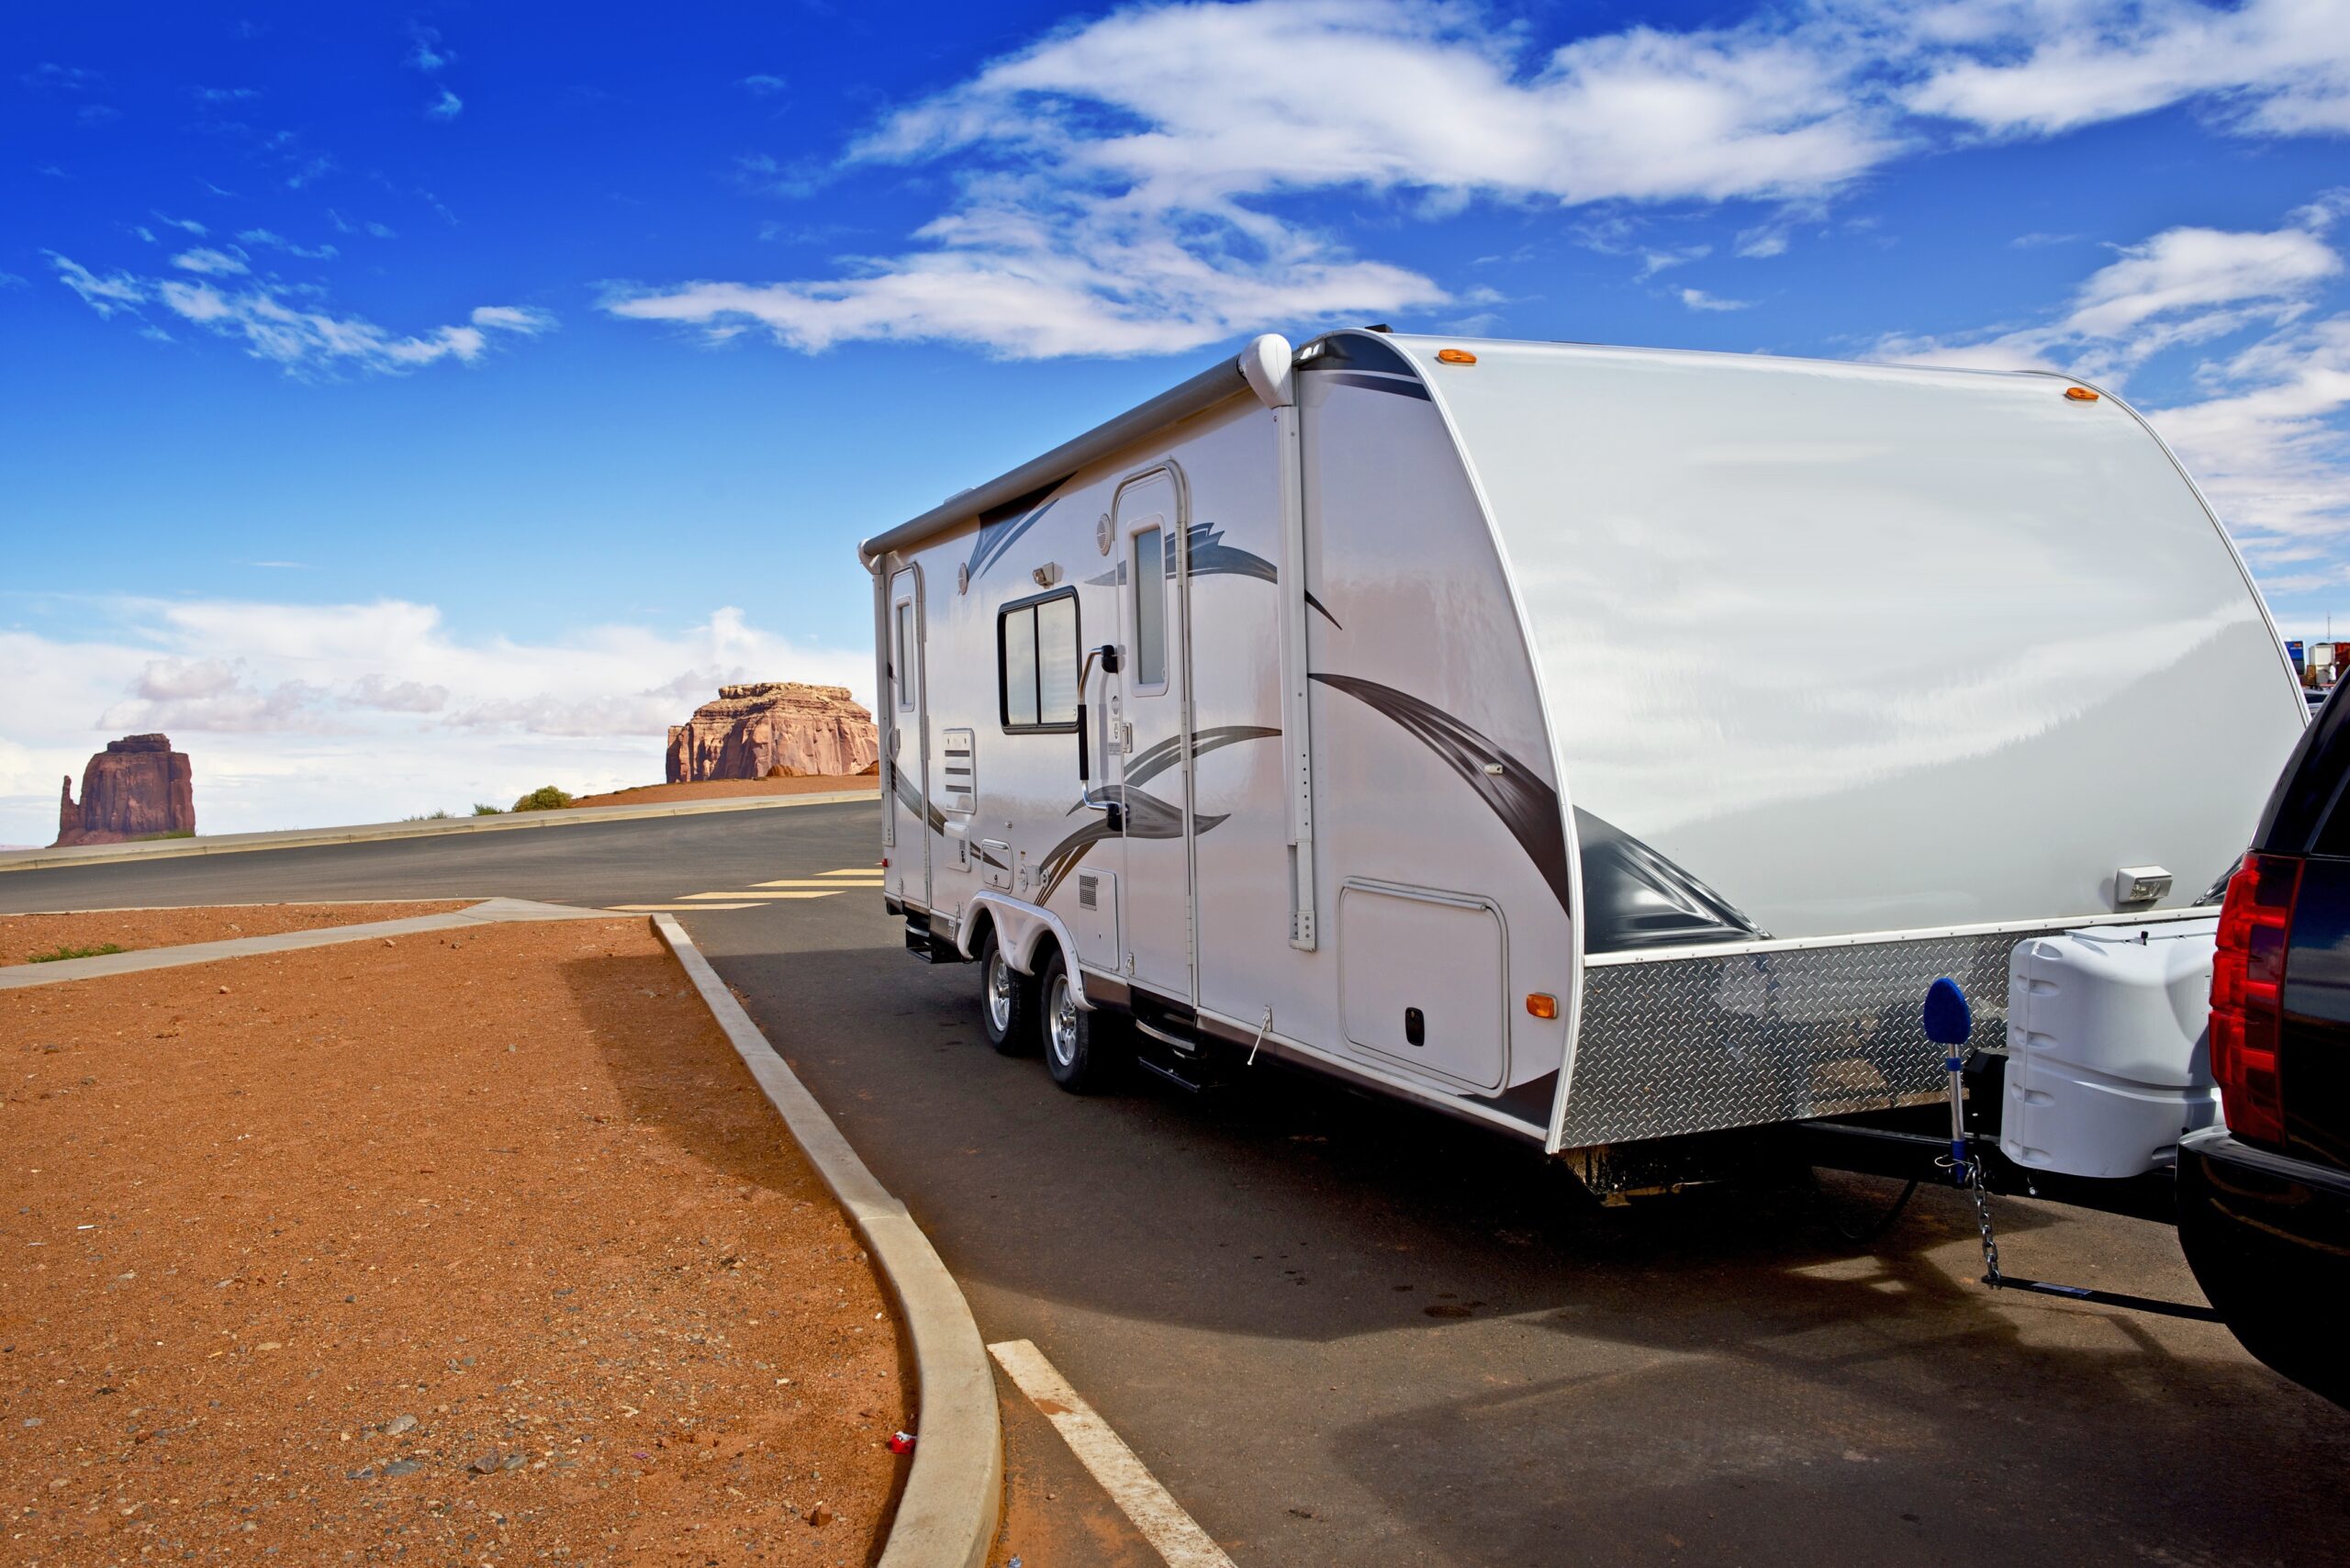 Towing a Recreational Vehicle RV